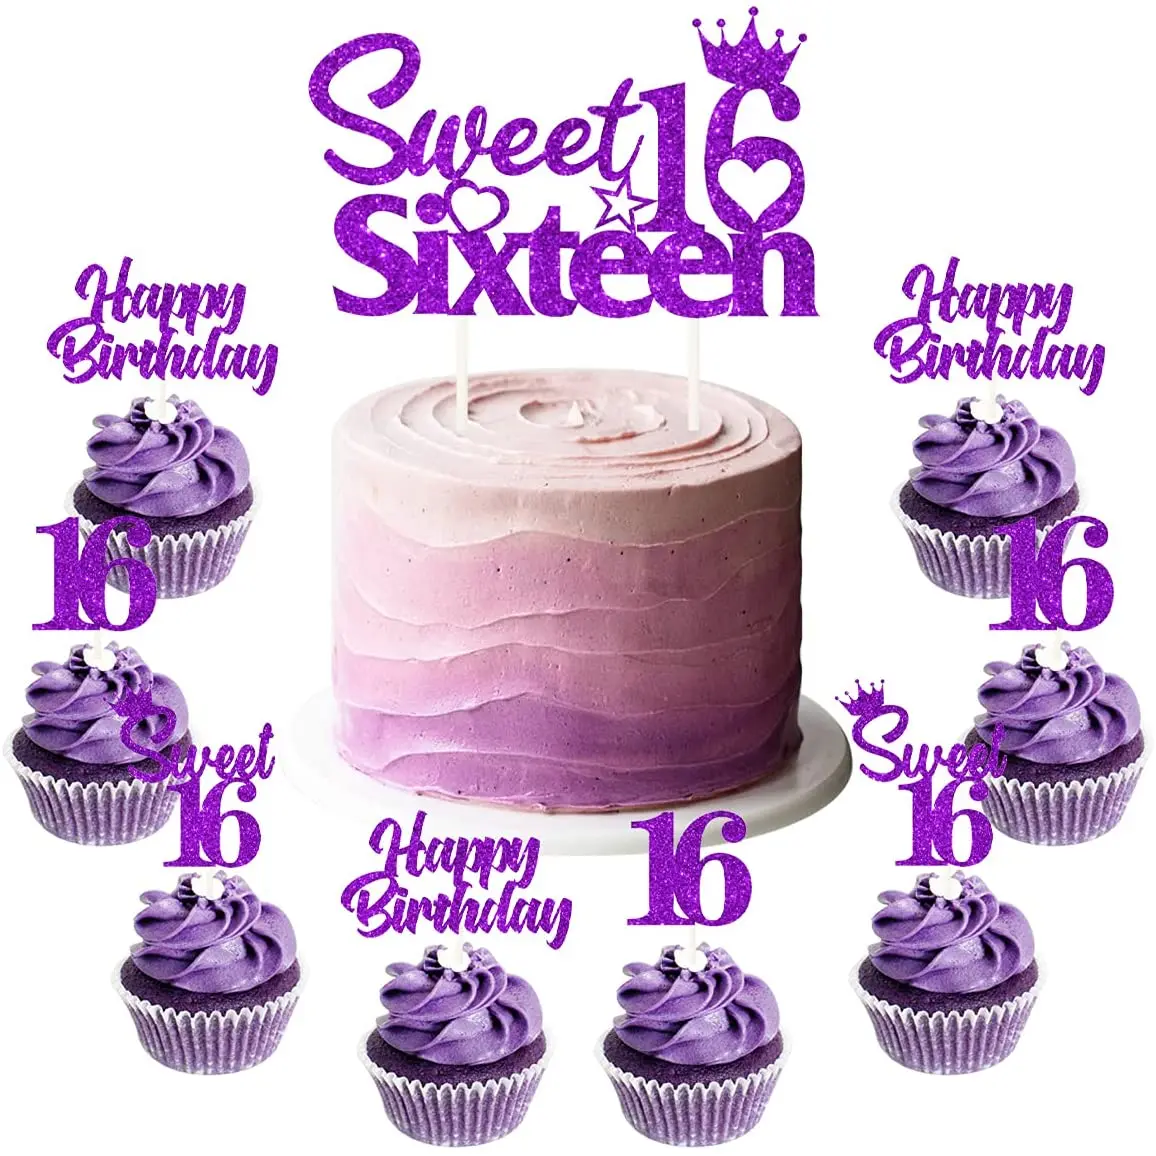 25 Pack 16th Birthday Cake Decorations Sweet 16 Sixteen Cake Topper Happy Birthday Sweet 16 Cupcake Toppers for Boys Girls